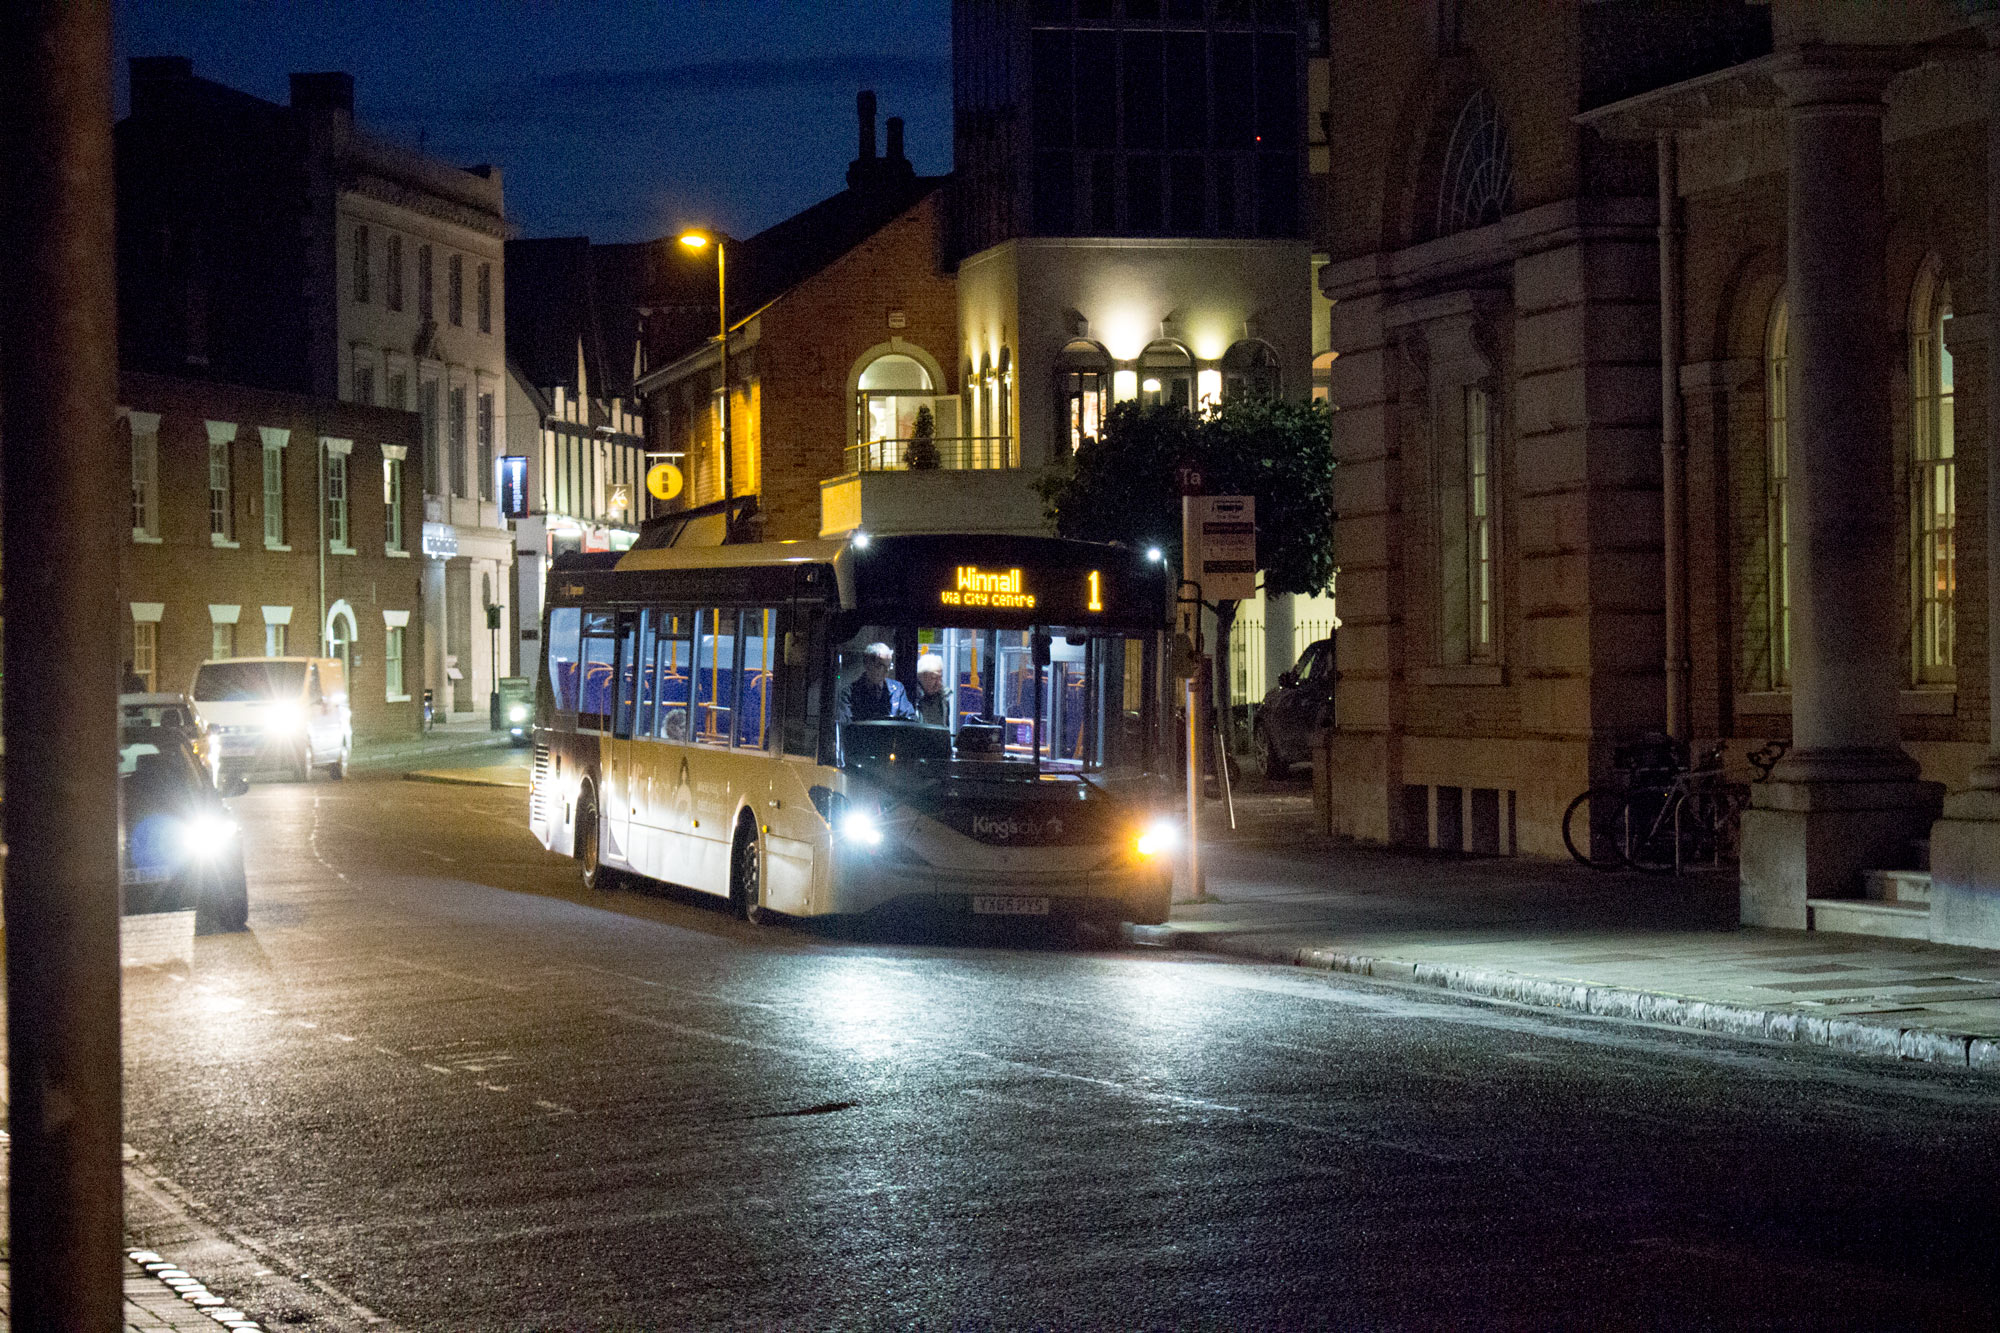 King's City branded Enviro 200 MMC operating in central Winchester headed for Winnall on Stagecoach South's route 1